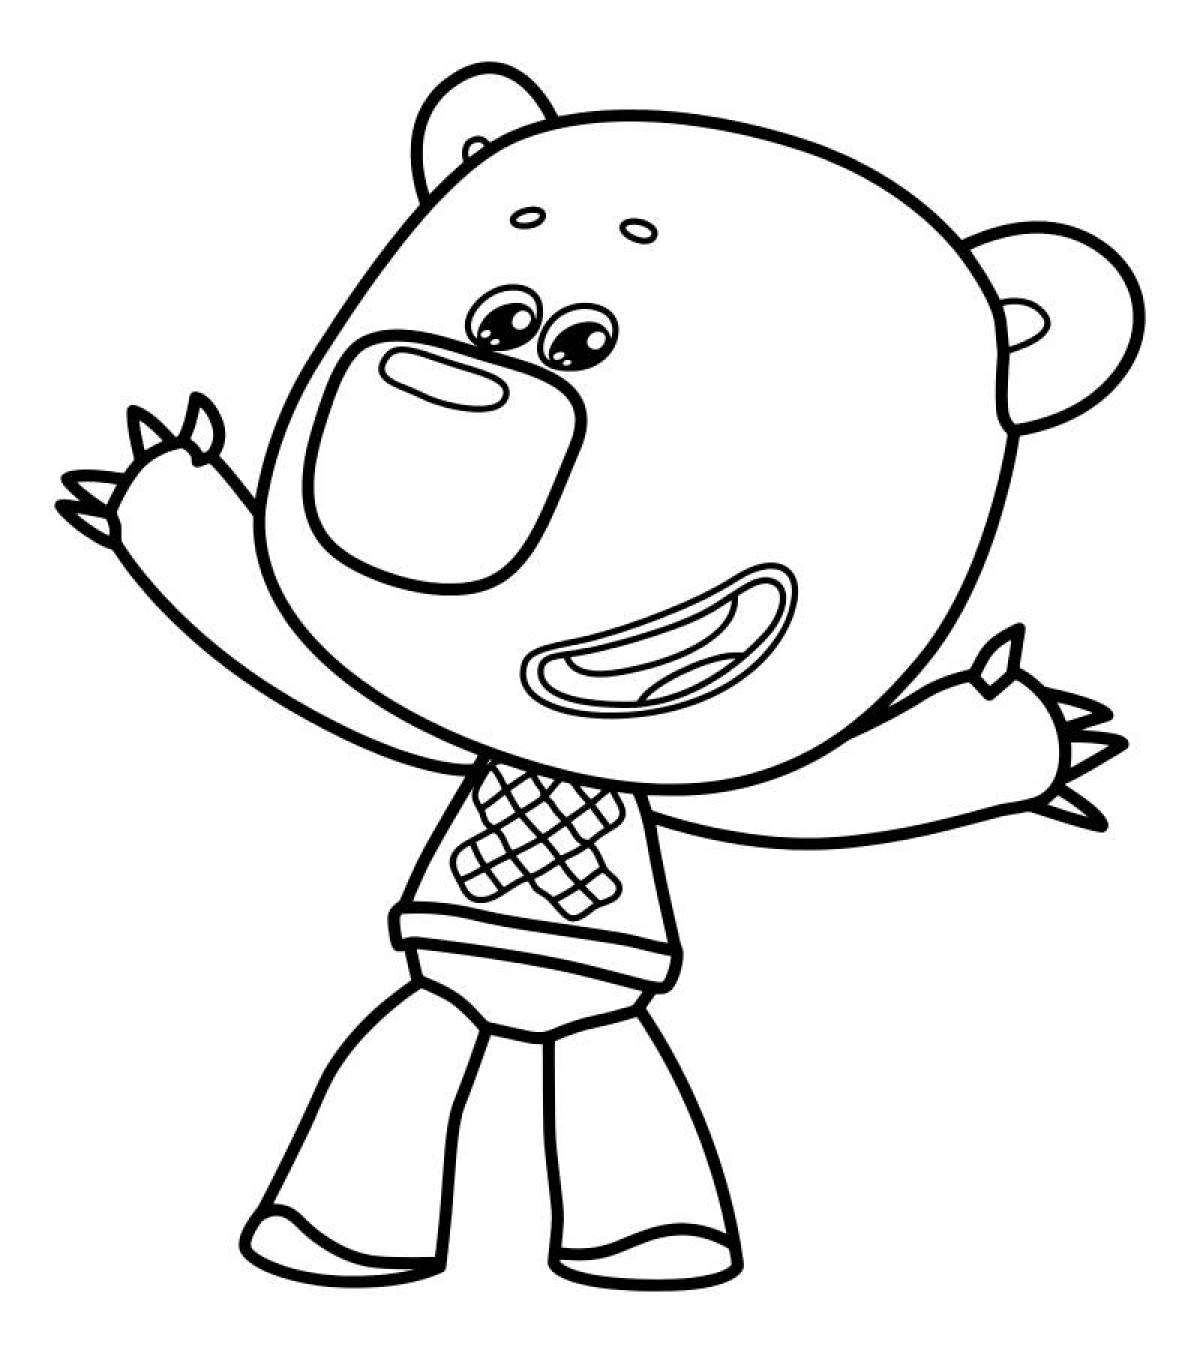 Adorable bear coloring pages